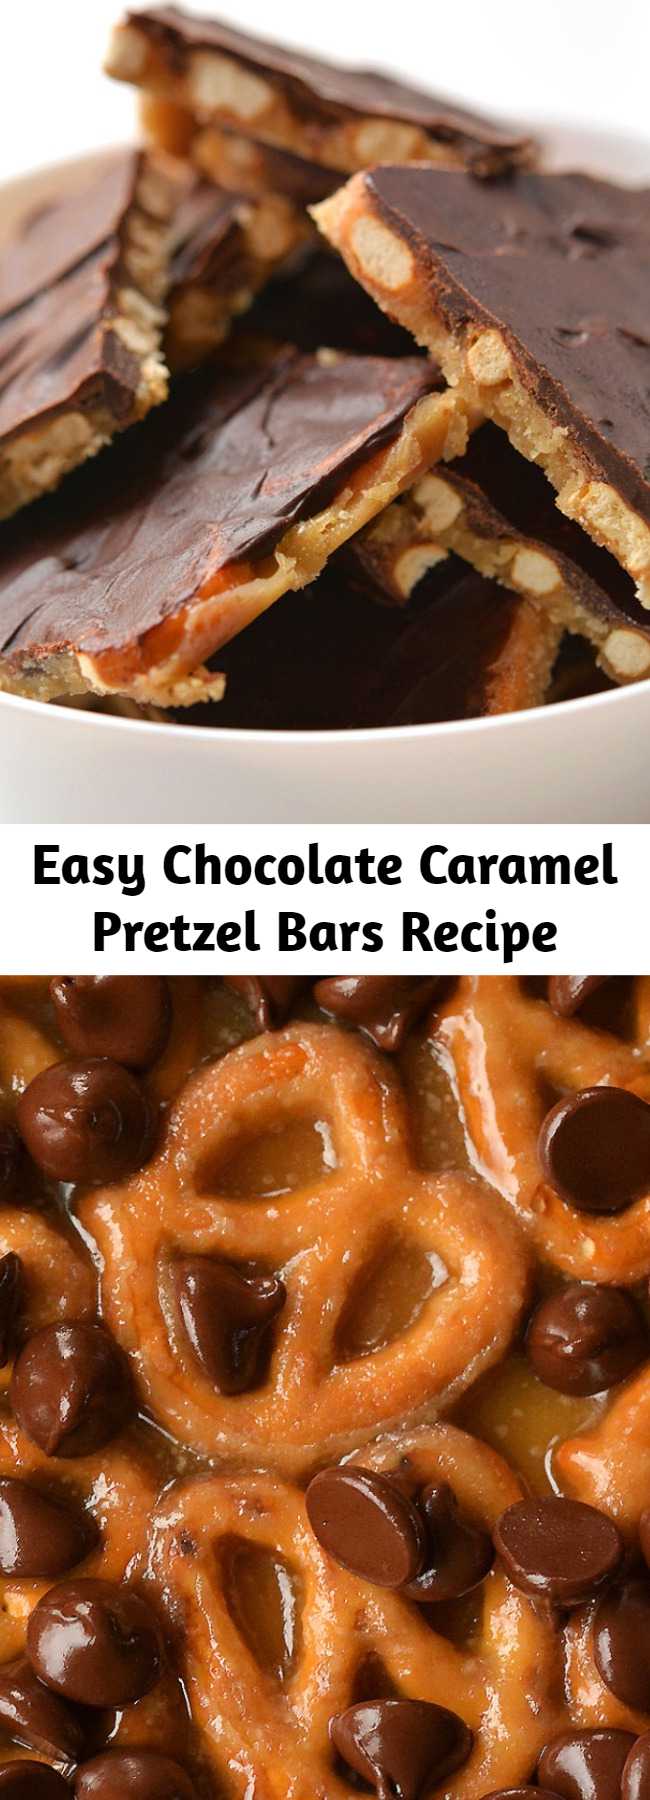 Easy Chocolate Caramel Pretzel Bars Recipe - These chocolate caramel pretzel bars are soooo good. And you only need 4 ingredients — so they’re really easy to make! The sweet chocolate and caramel goes so perfectly with the salty crunch of the pretzels. A salty, crunchy and sweet holiday treat!